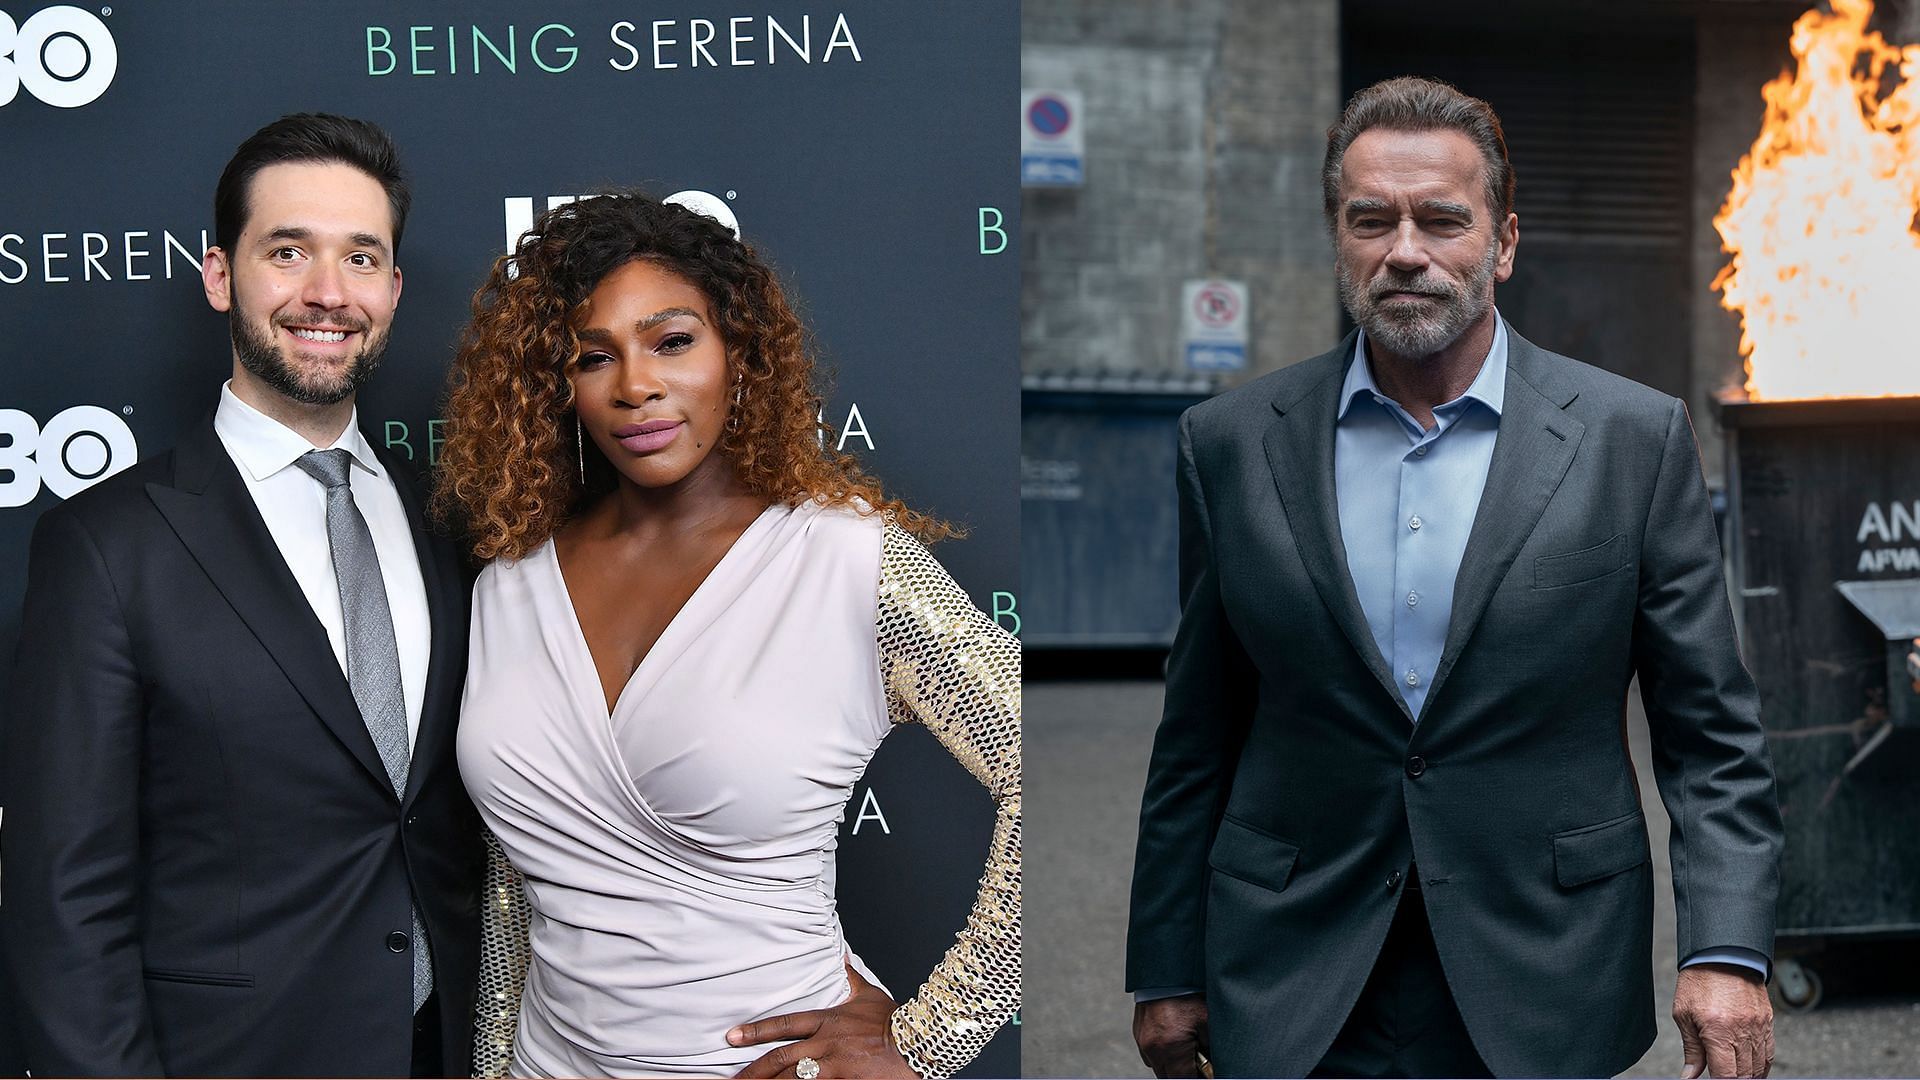 (From L-R) Alexis Ohanian, Serena Williams and Arnold Schwarzenegger